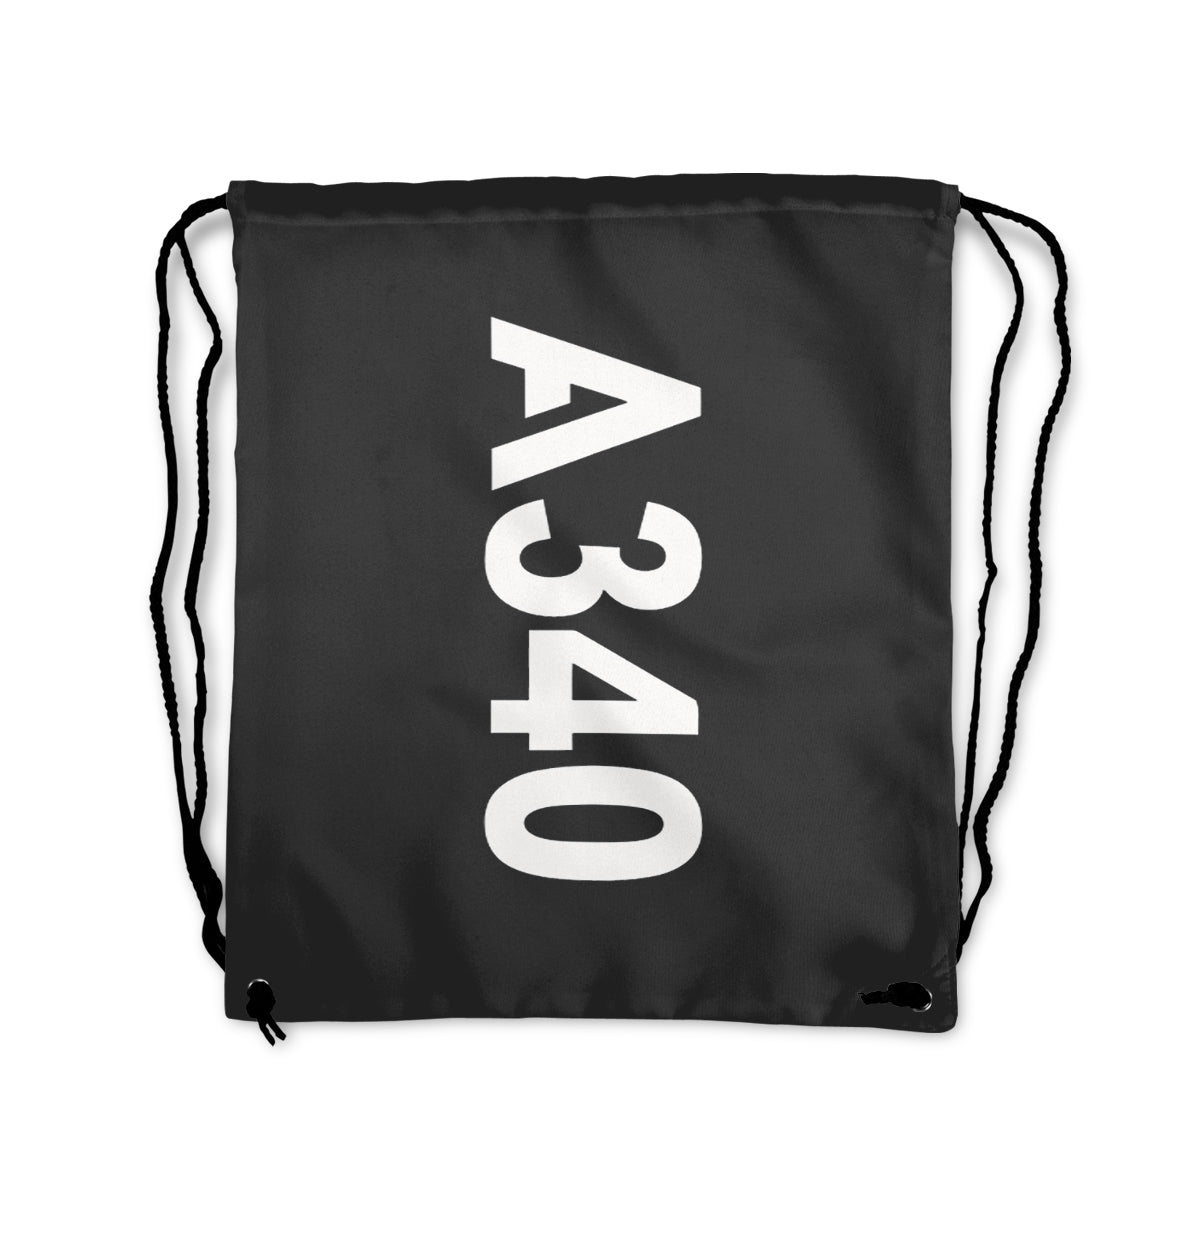 A340 Text Designed Drawstring Bags